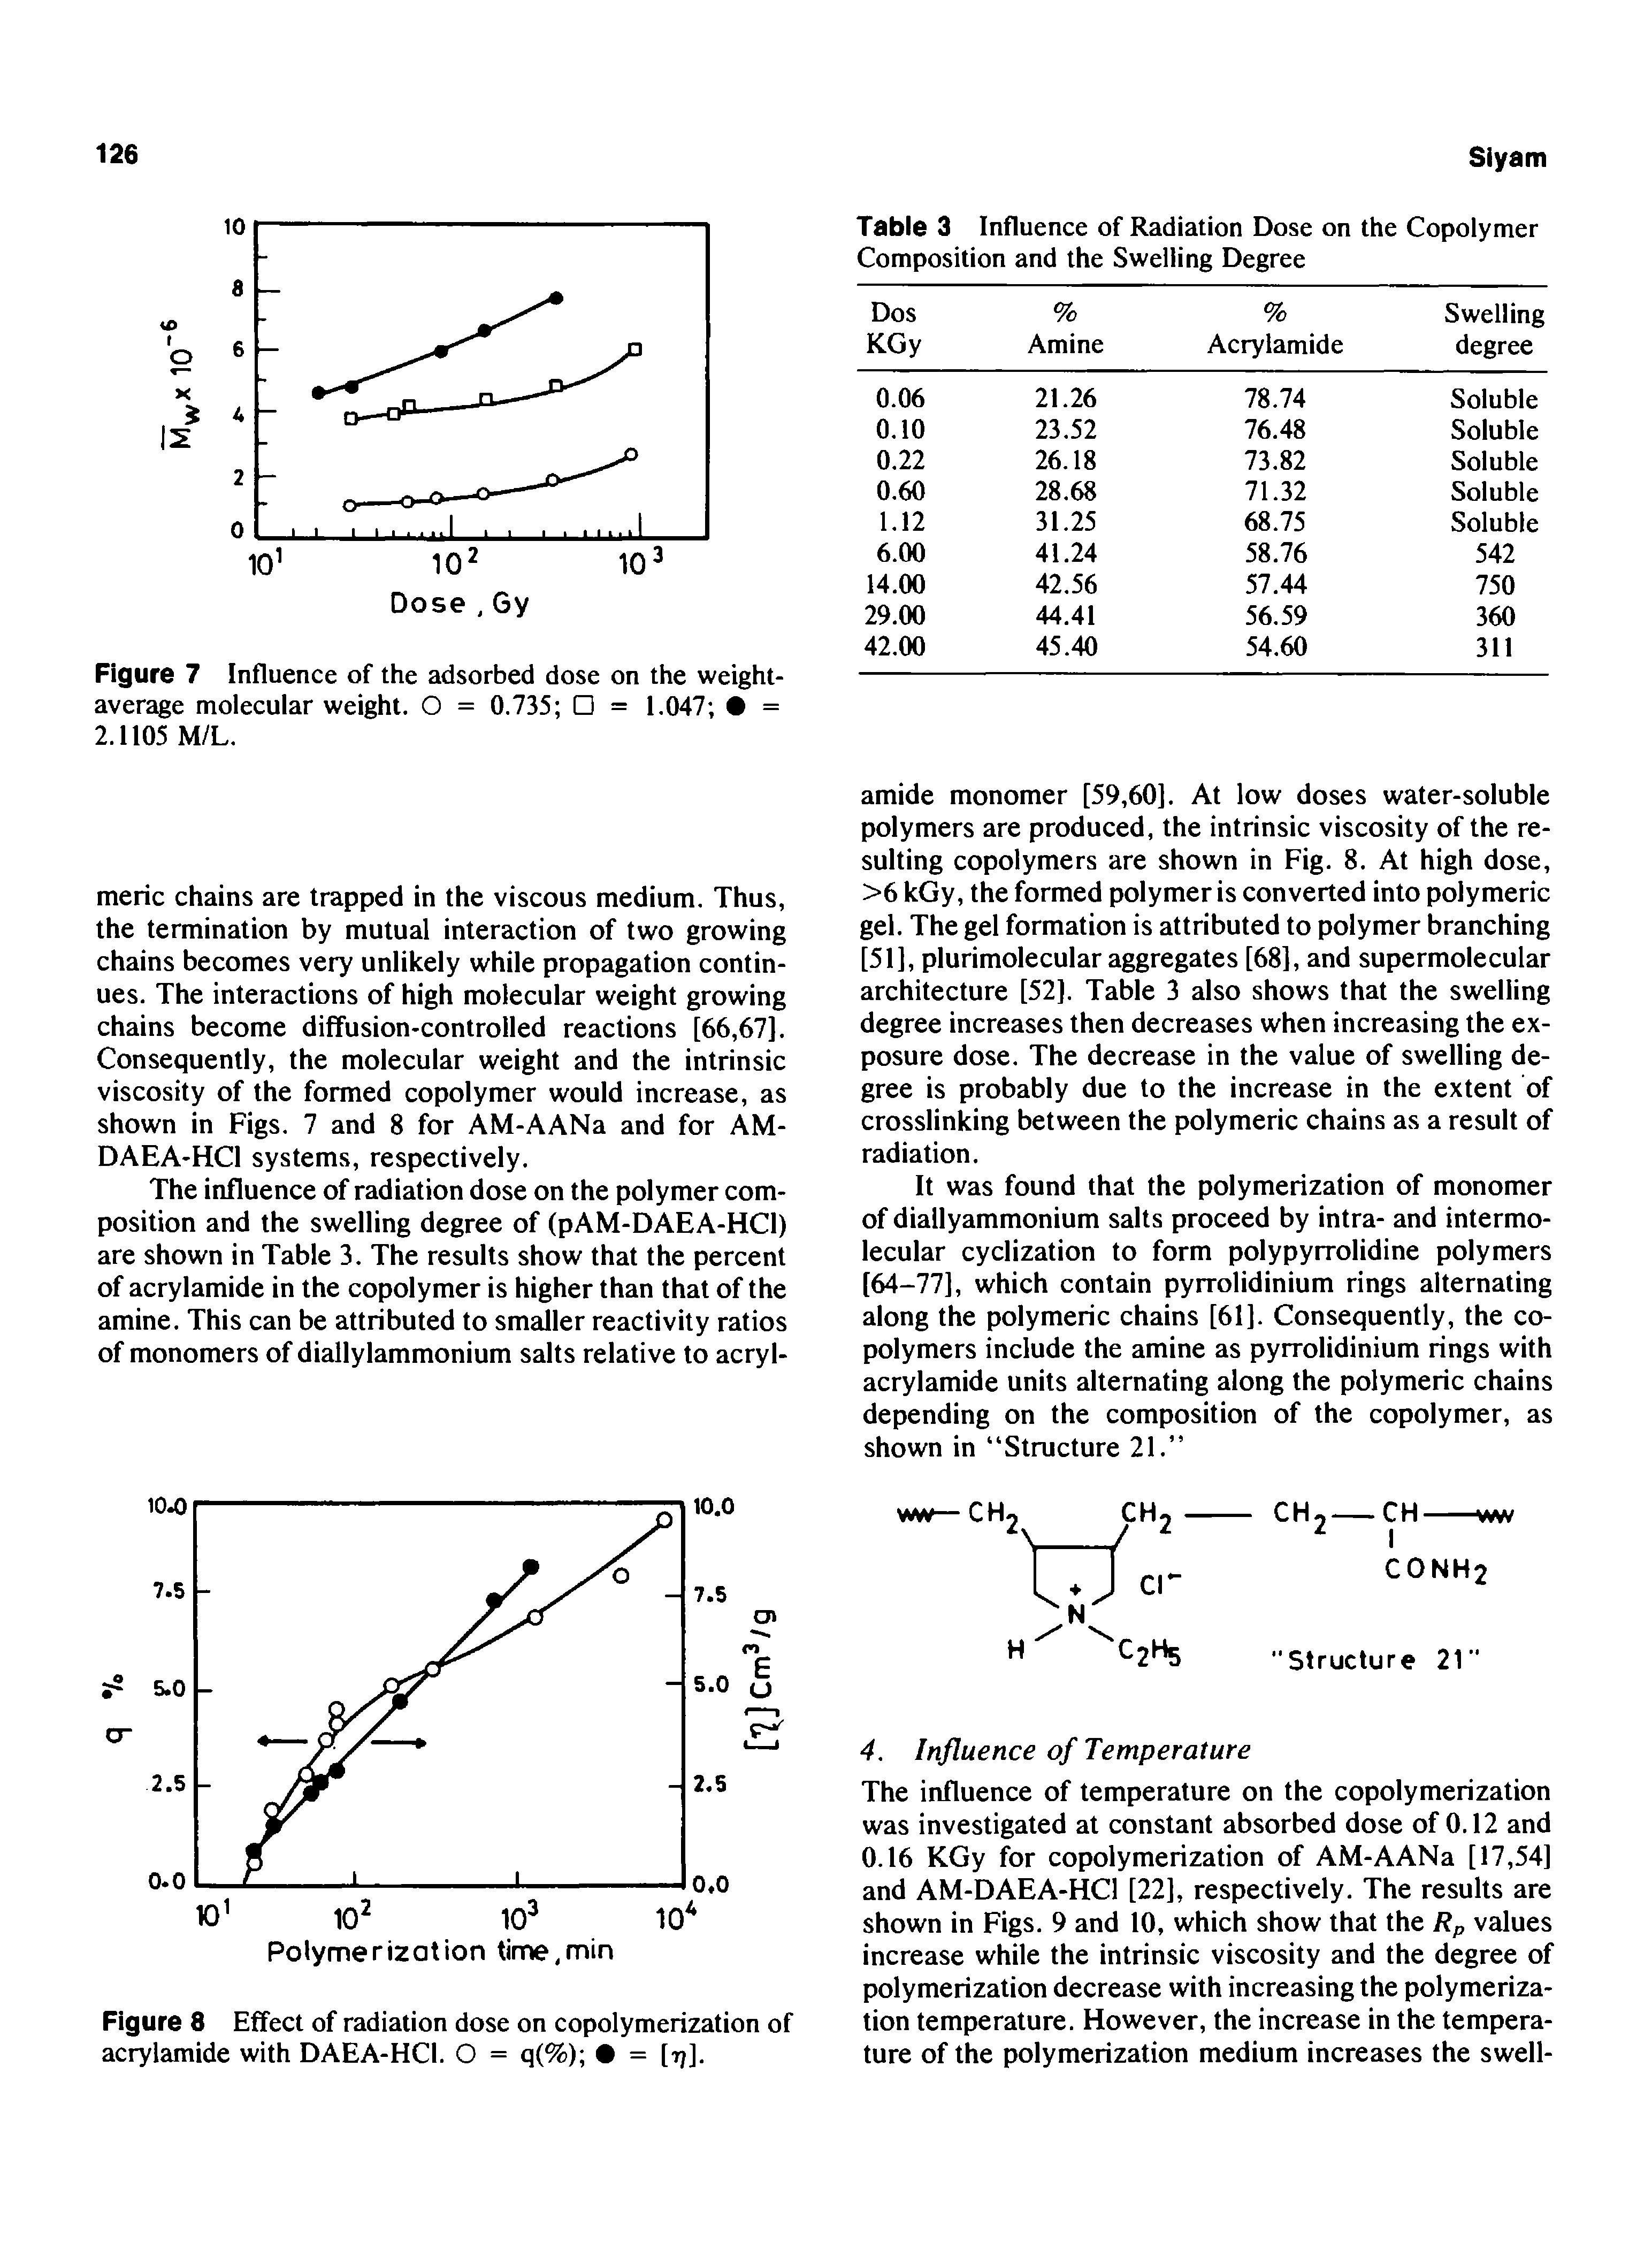 Figure 8 Effect of radiation dose on copolymerization of acrylamide with DAEA-HCl. O = q(%) = [tj].